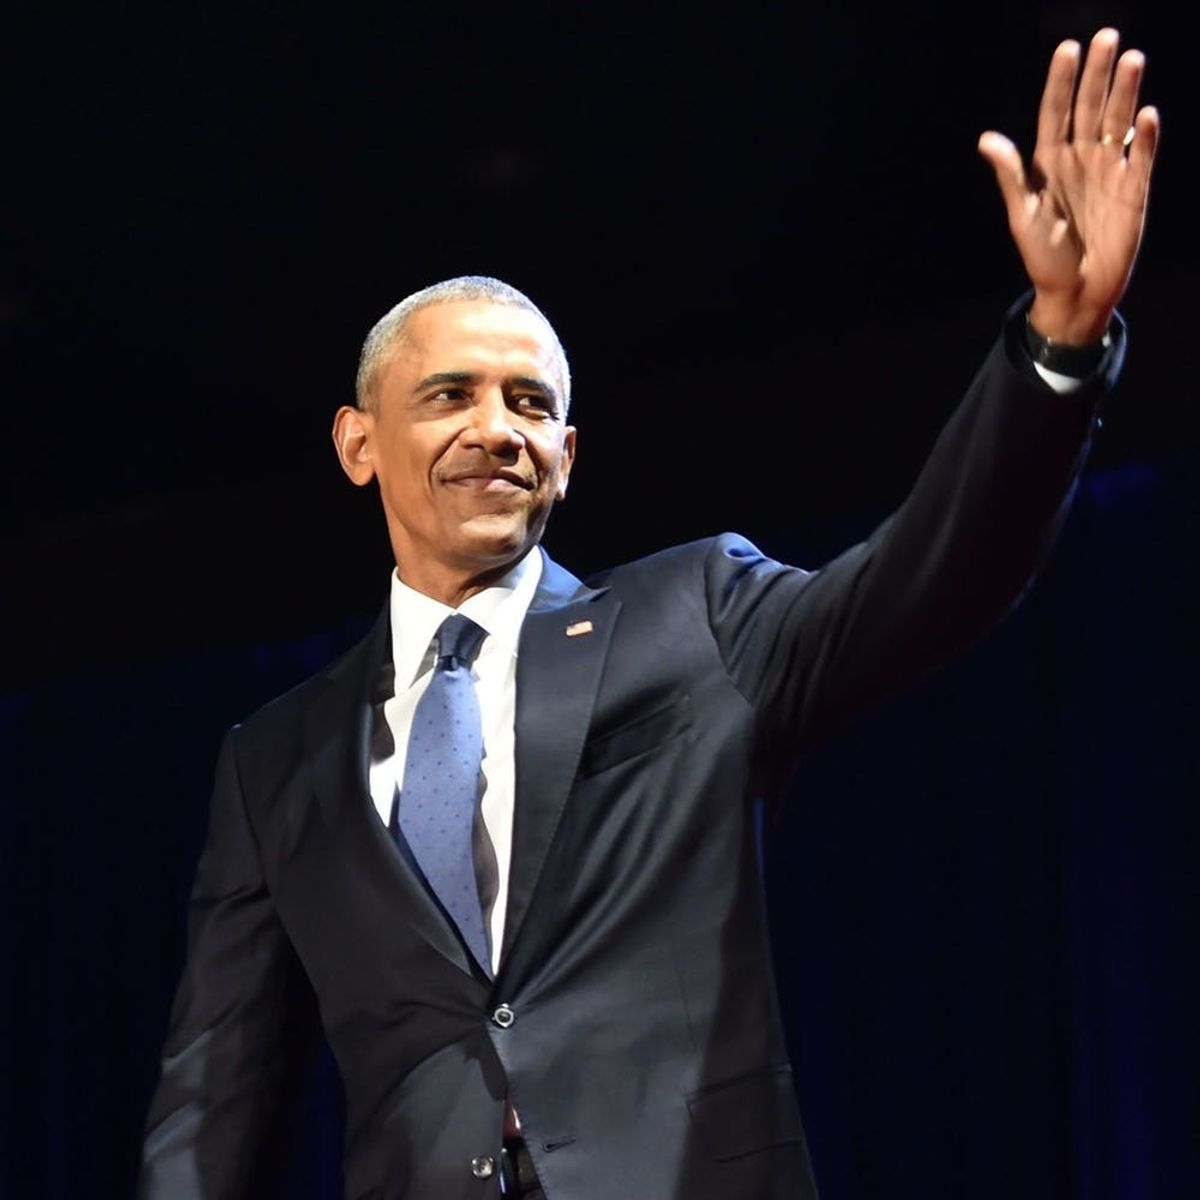 Here’s How Celebs Are Paying Tribute to Obama Following His Farewell Speech